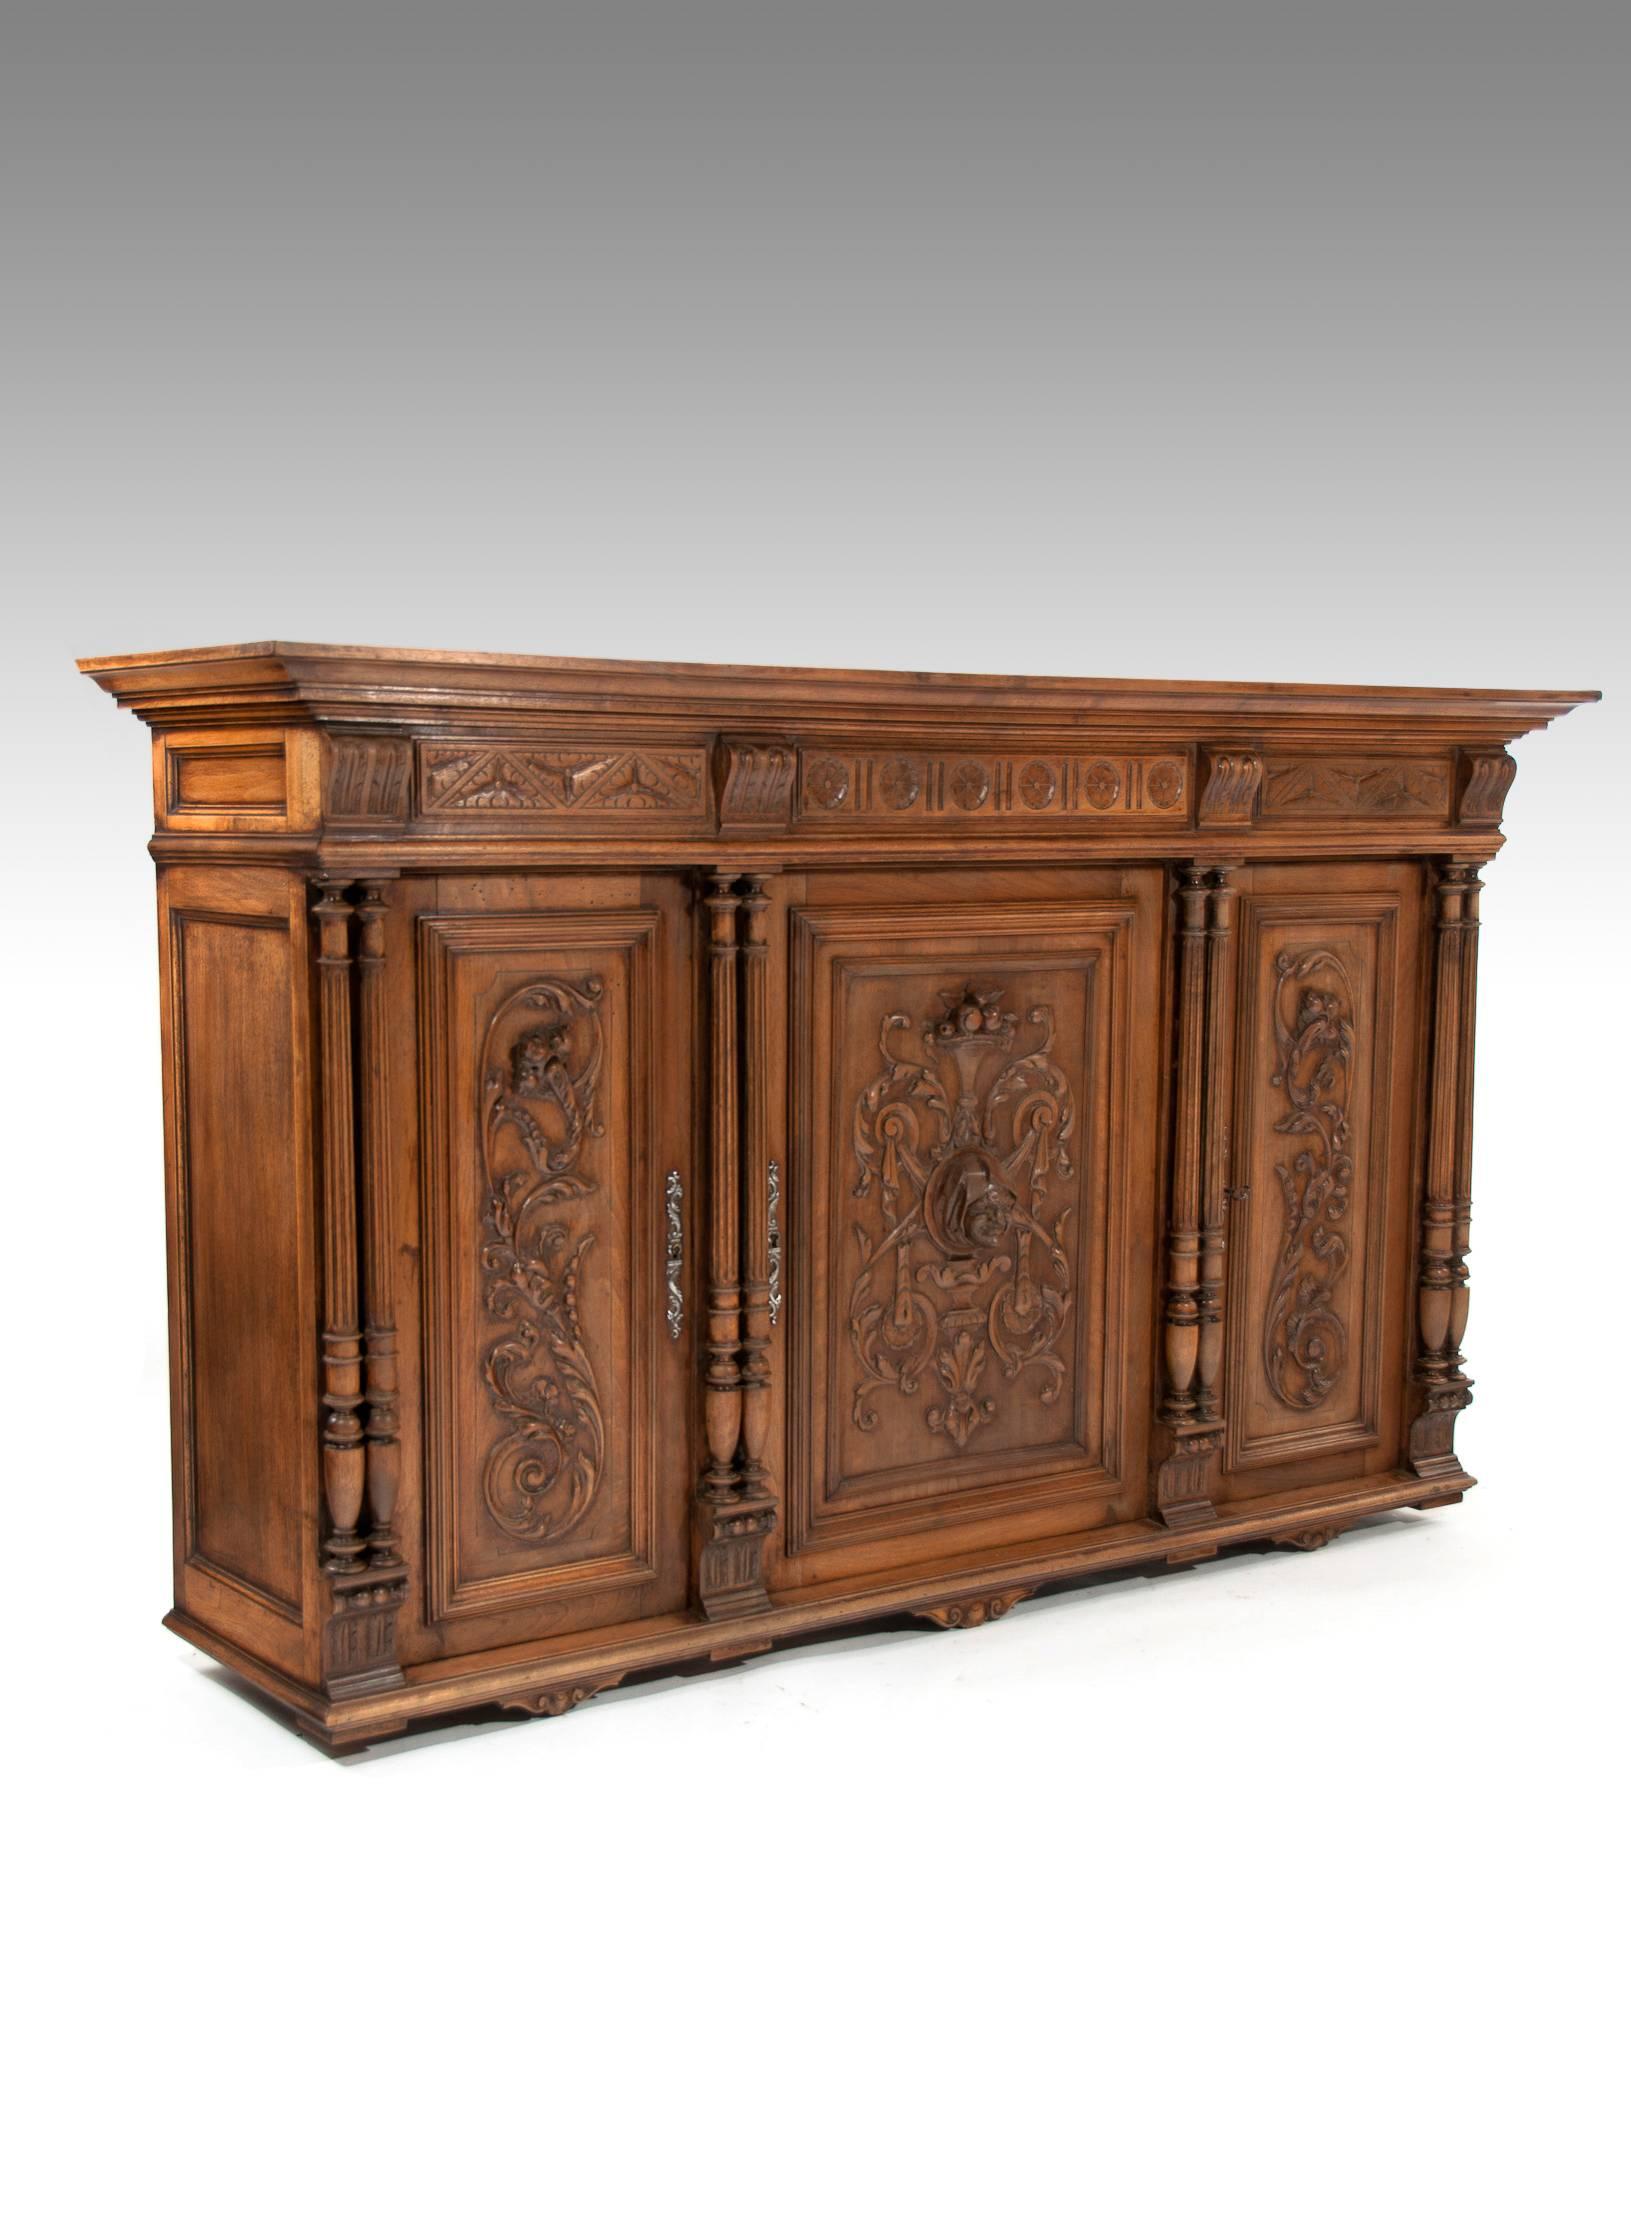 A 19th century European carved hanging three-door Renaissance Revival cabinet, circa 1870.
Of an extremely high standard of carving having an unusual protruding rural villager pointing outward from the middle door (with wart to the chin!) this